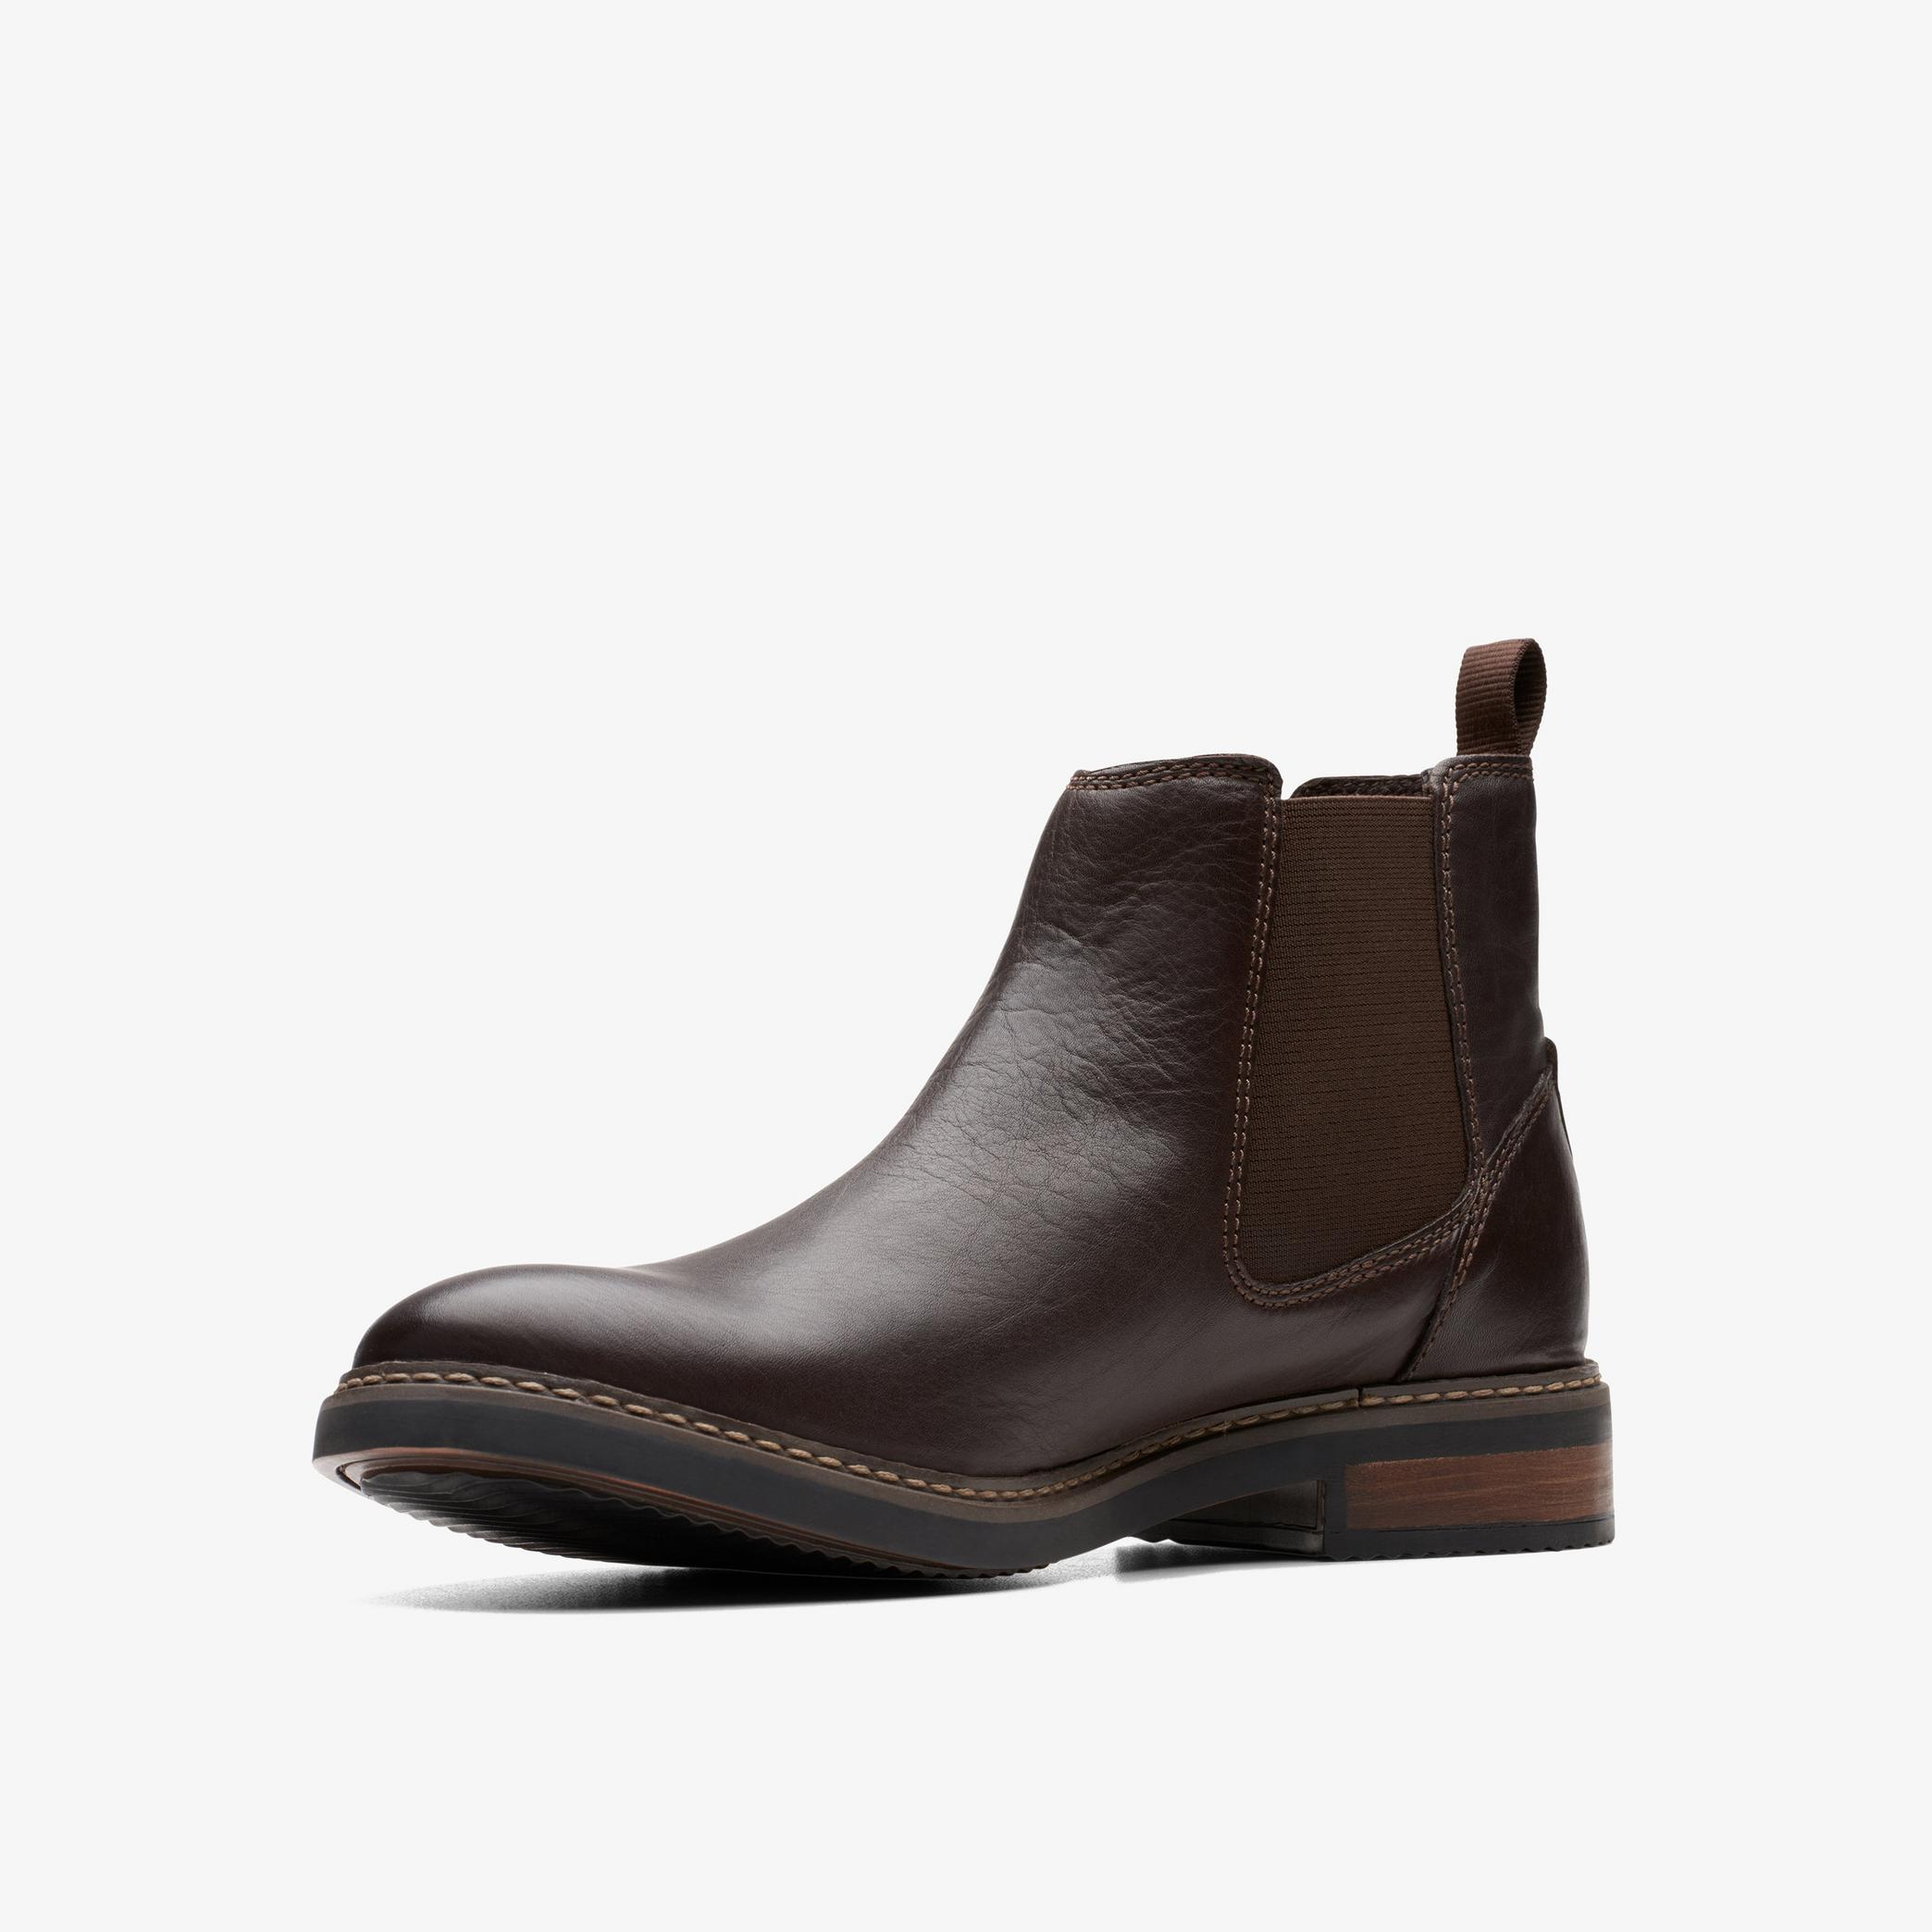 Blackford Top Dark Brown Leather Chelsea Boots, view 4 of 6